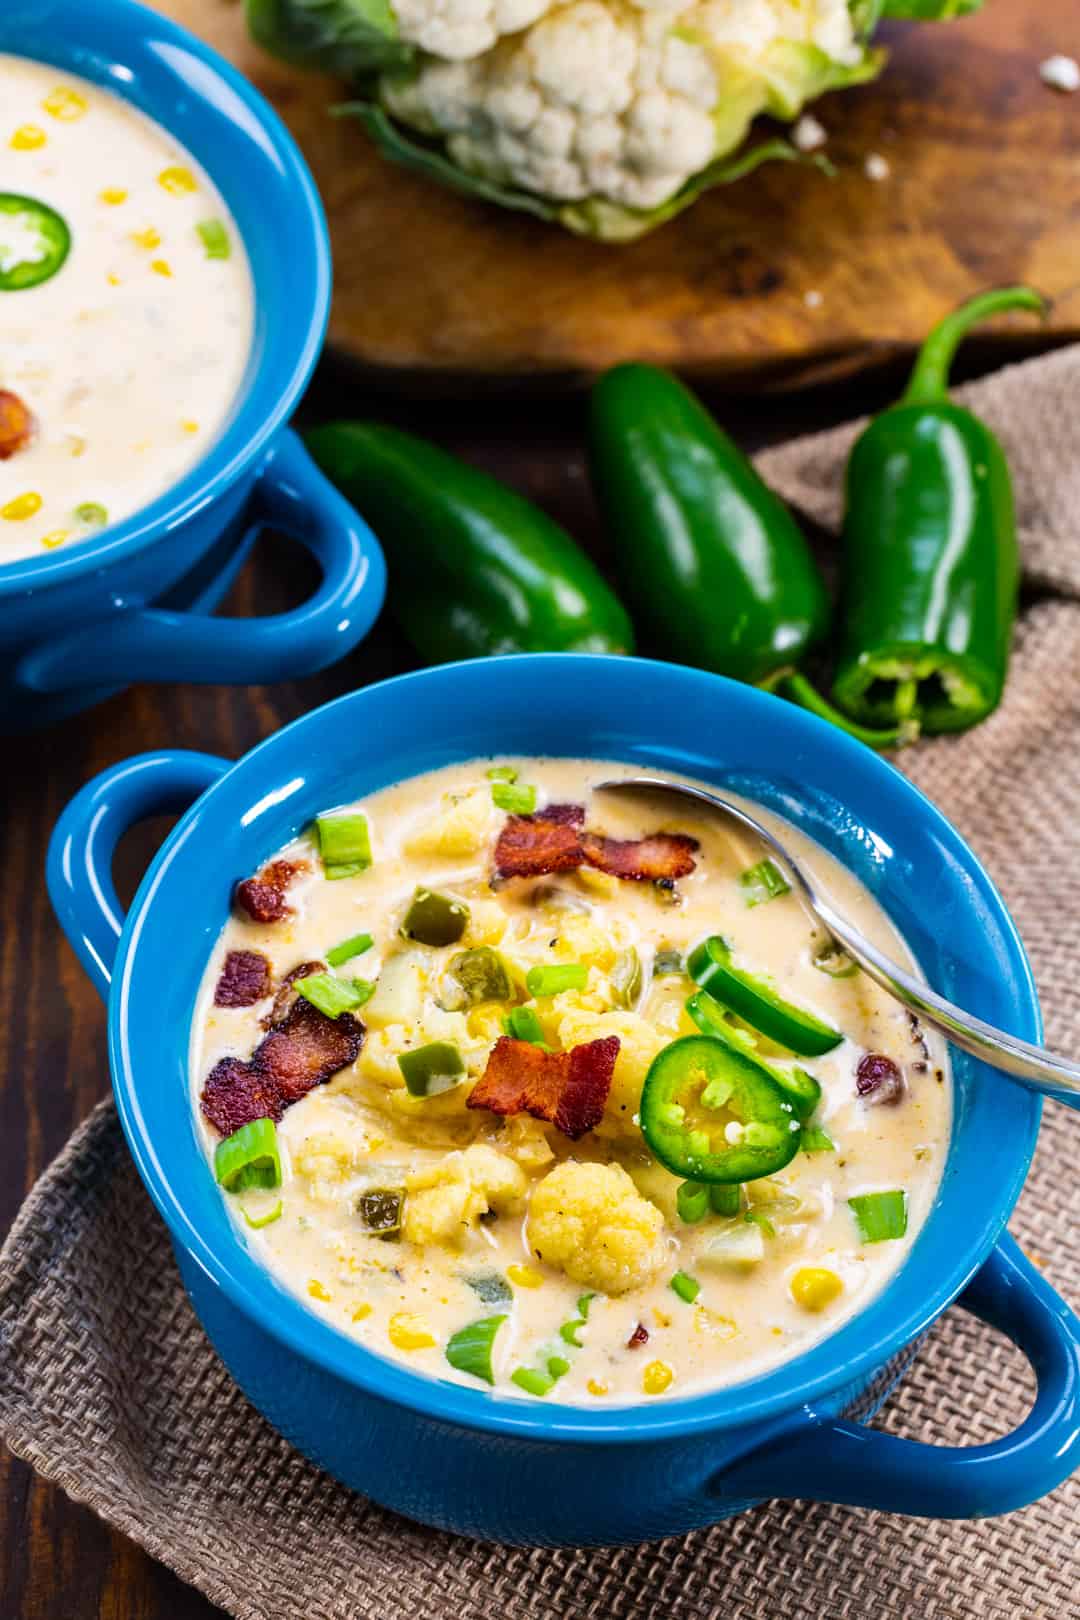 Soup in 2 bowls and fresh jalapeno peppers.